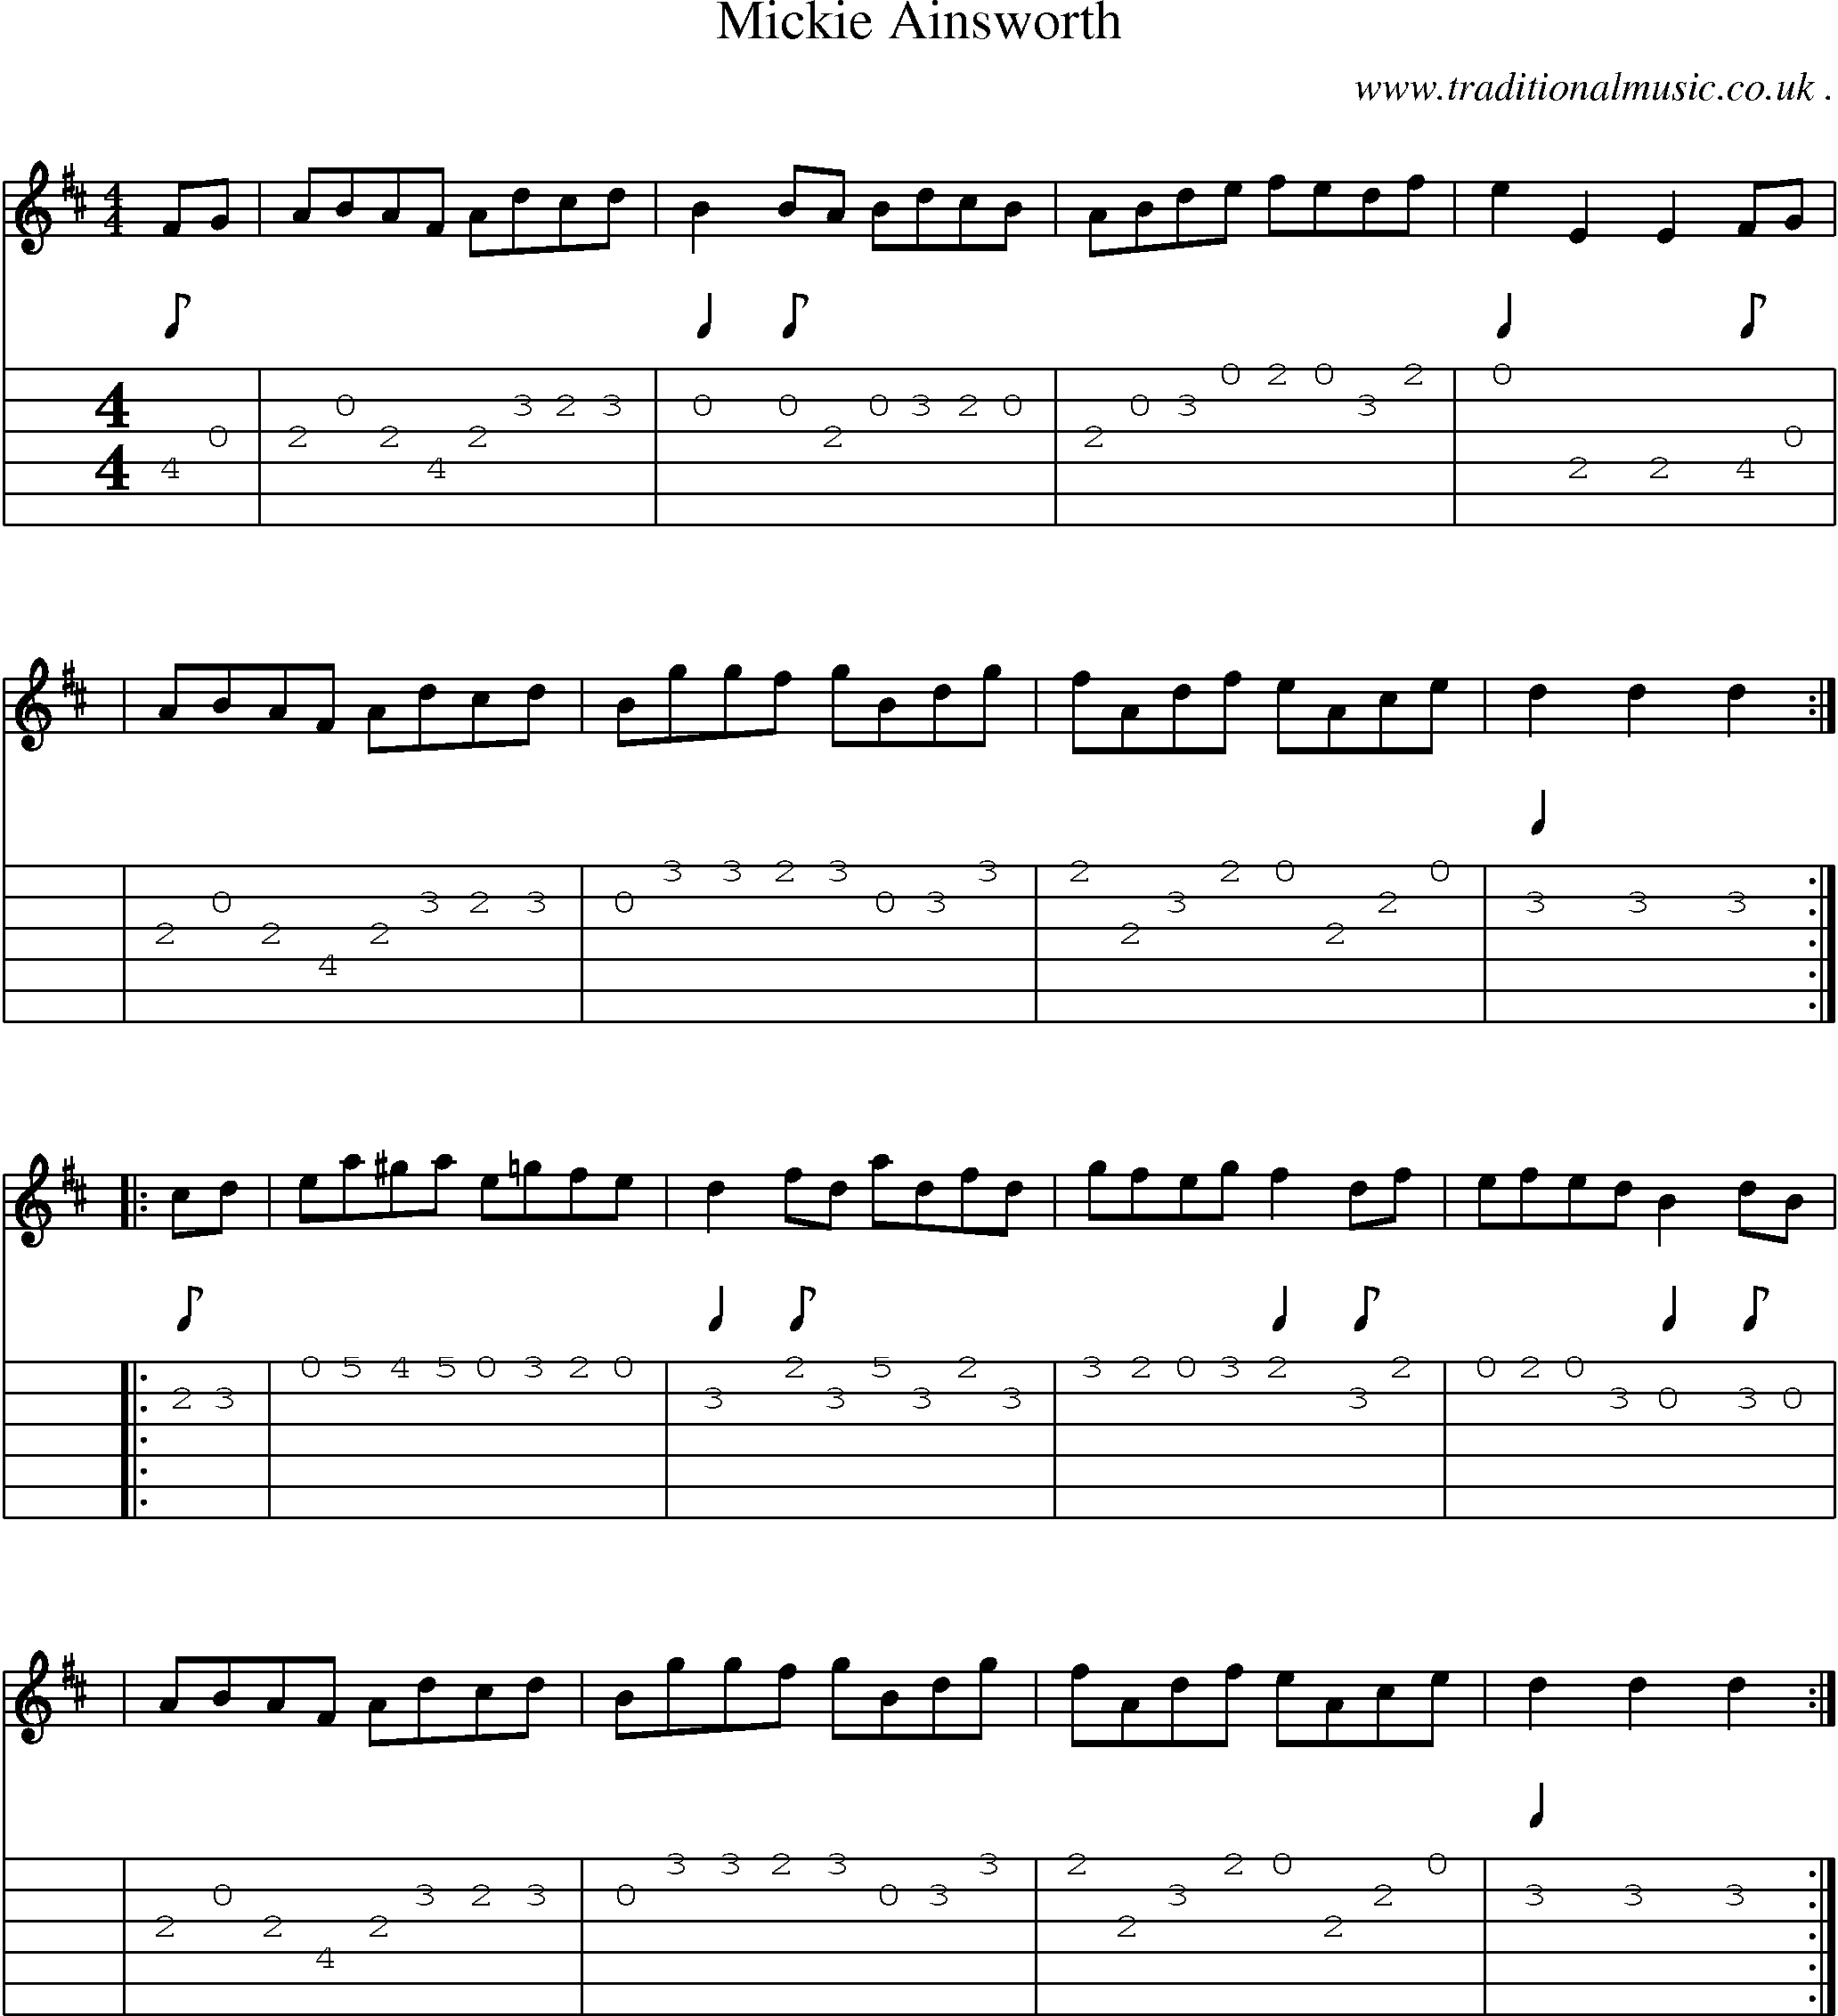 Sheet-Music and Guitar Tabs for Mickie Ainsworth